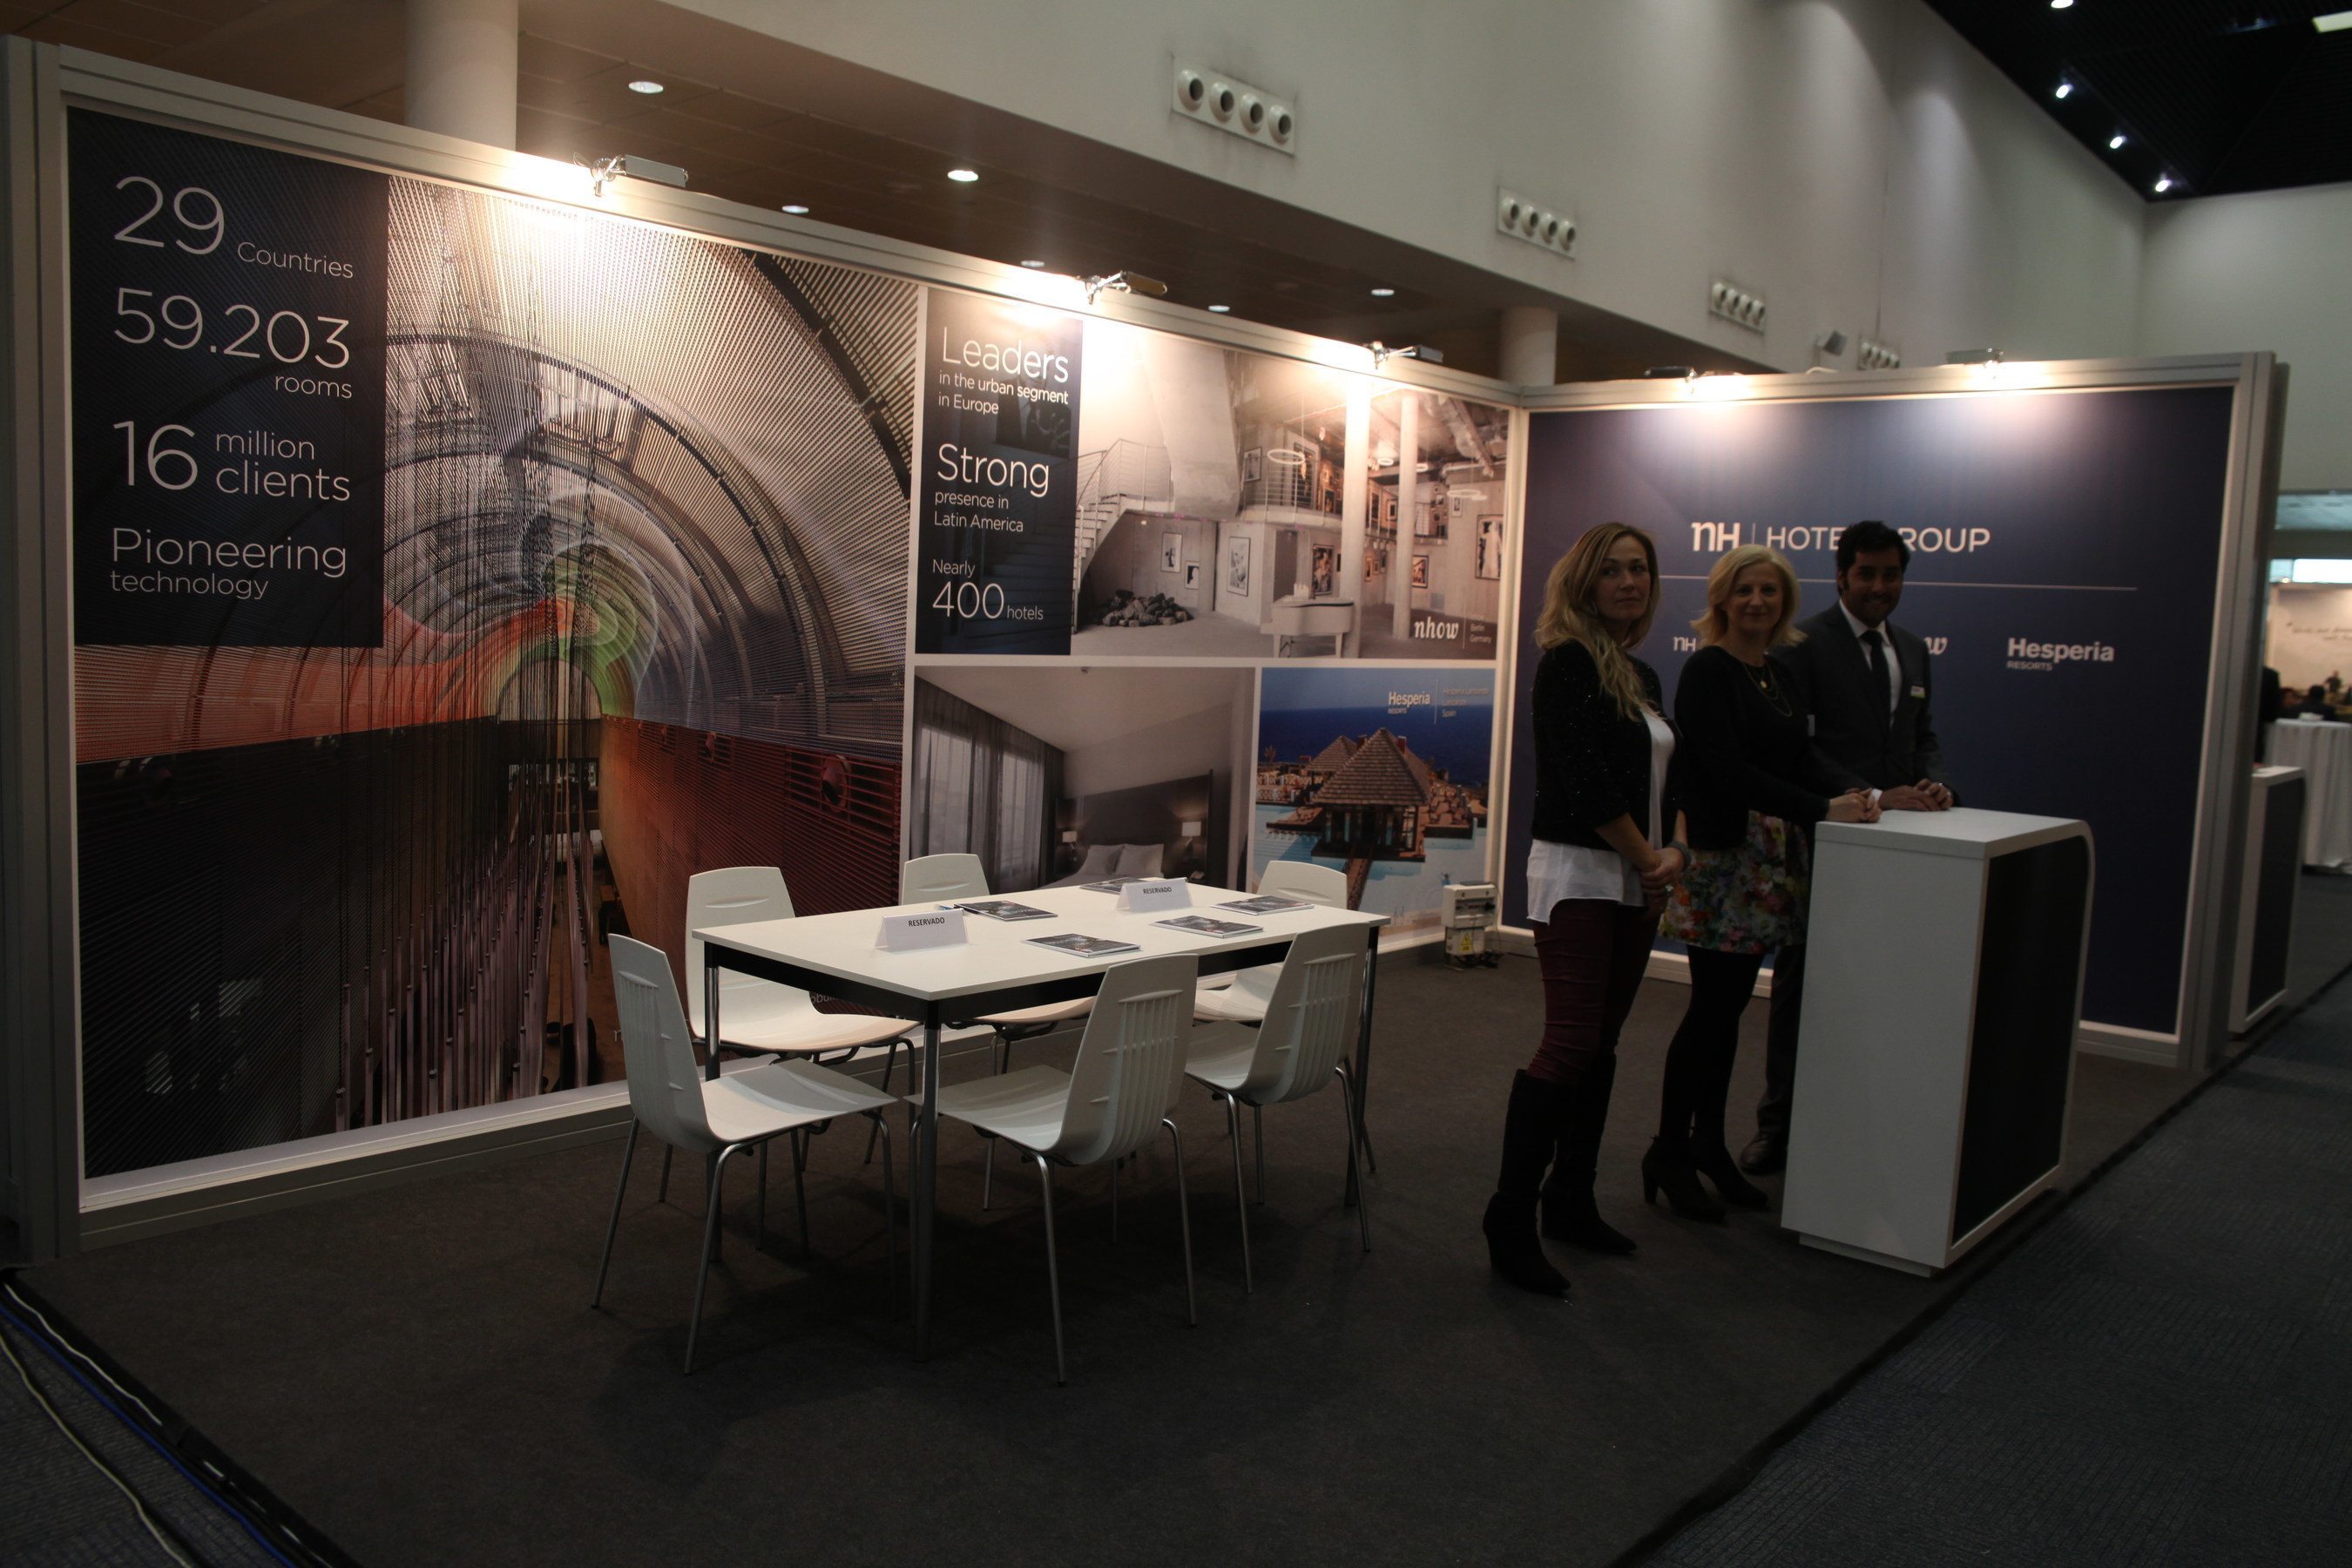 NH Hotel Group, a subsidiary of HNA Group and the third largest hotel group in Europe, takes part in the exhibition